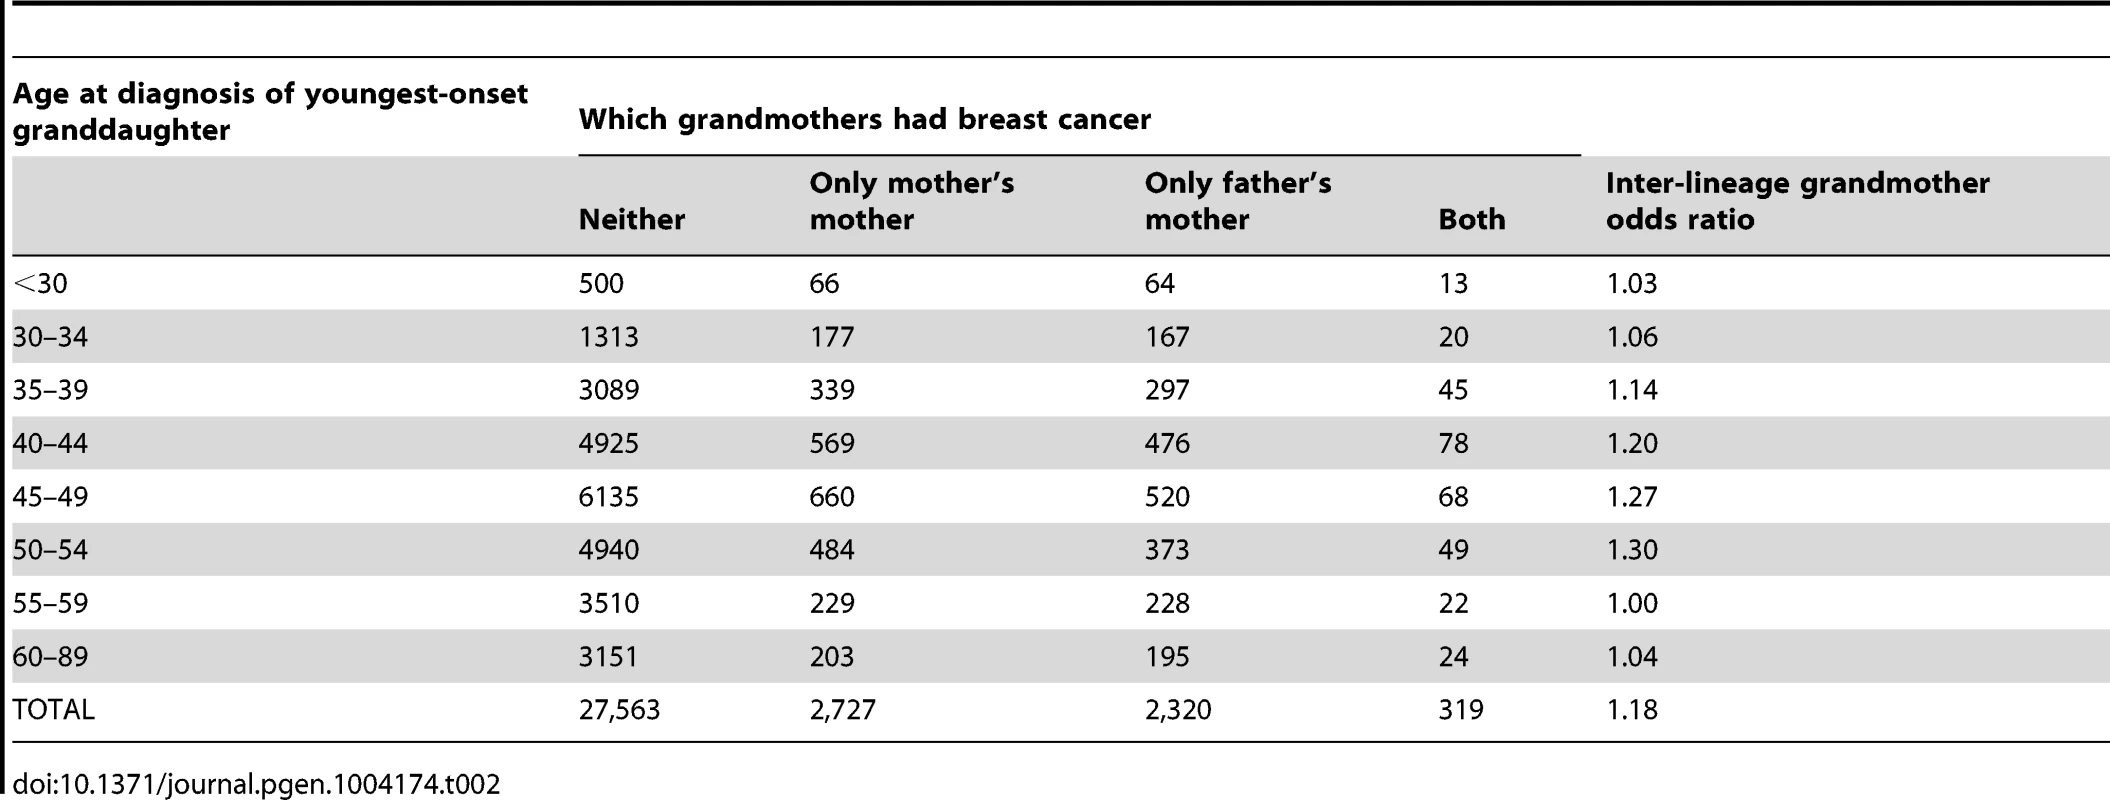 Grandmothers' breast cancer history by age at breast cancer diagnosis of the youngest-onset grand-daughter.